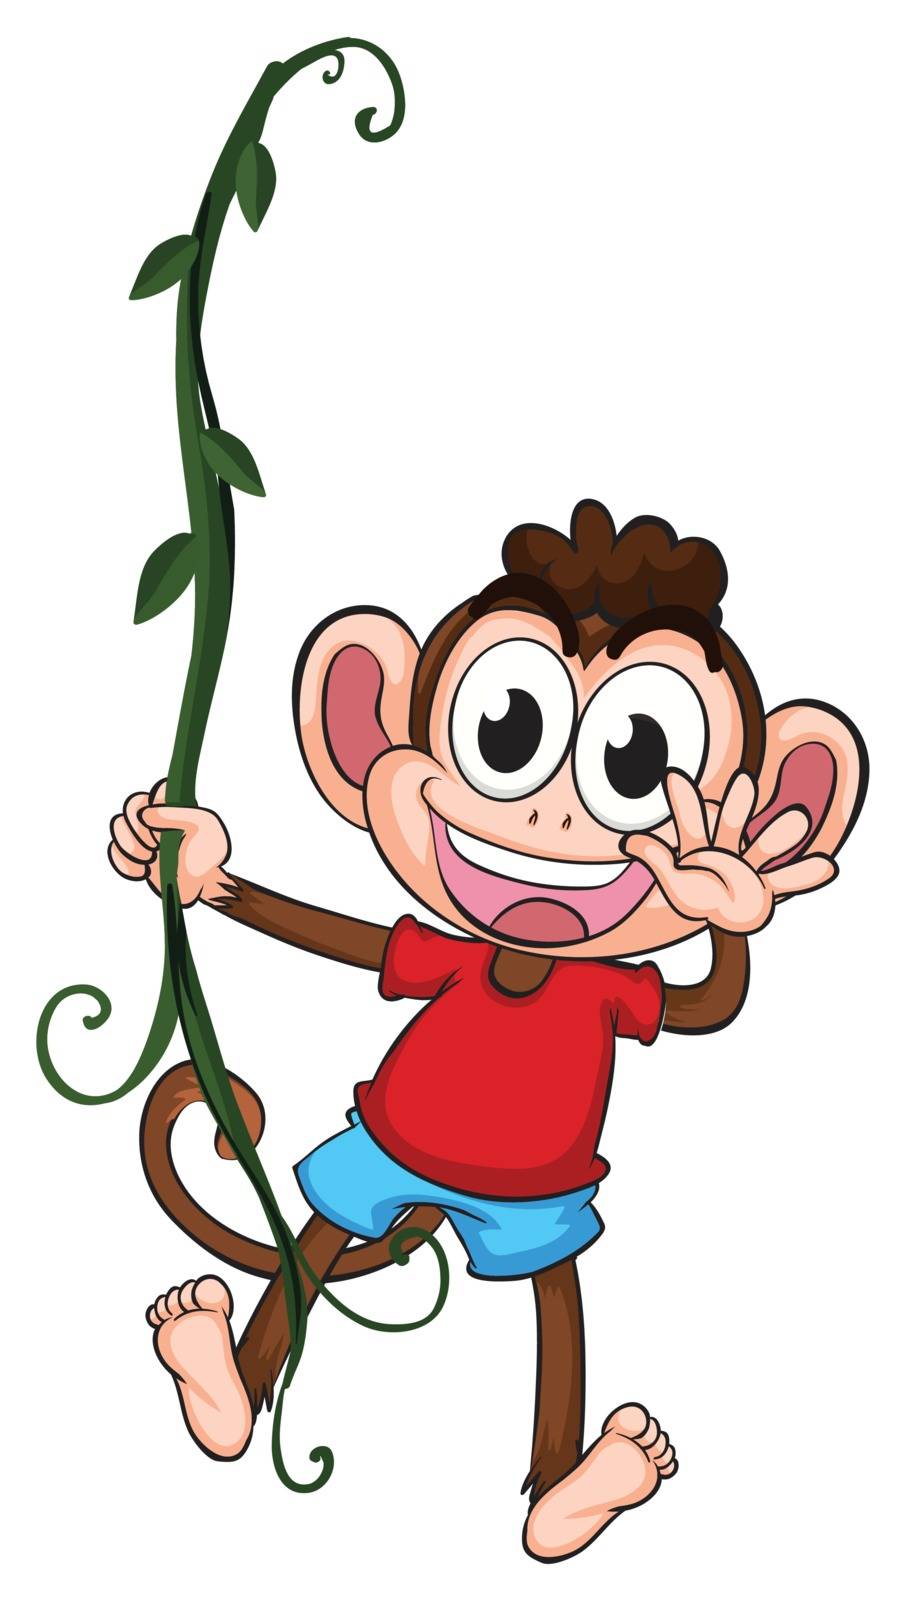 Illustration of a monkey hanging on a plant on a white background